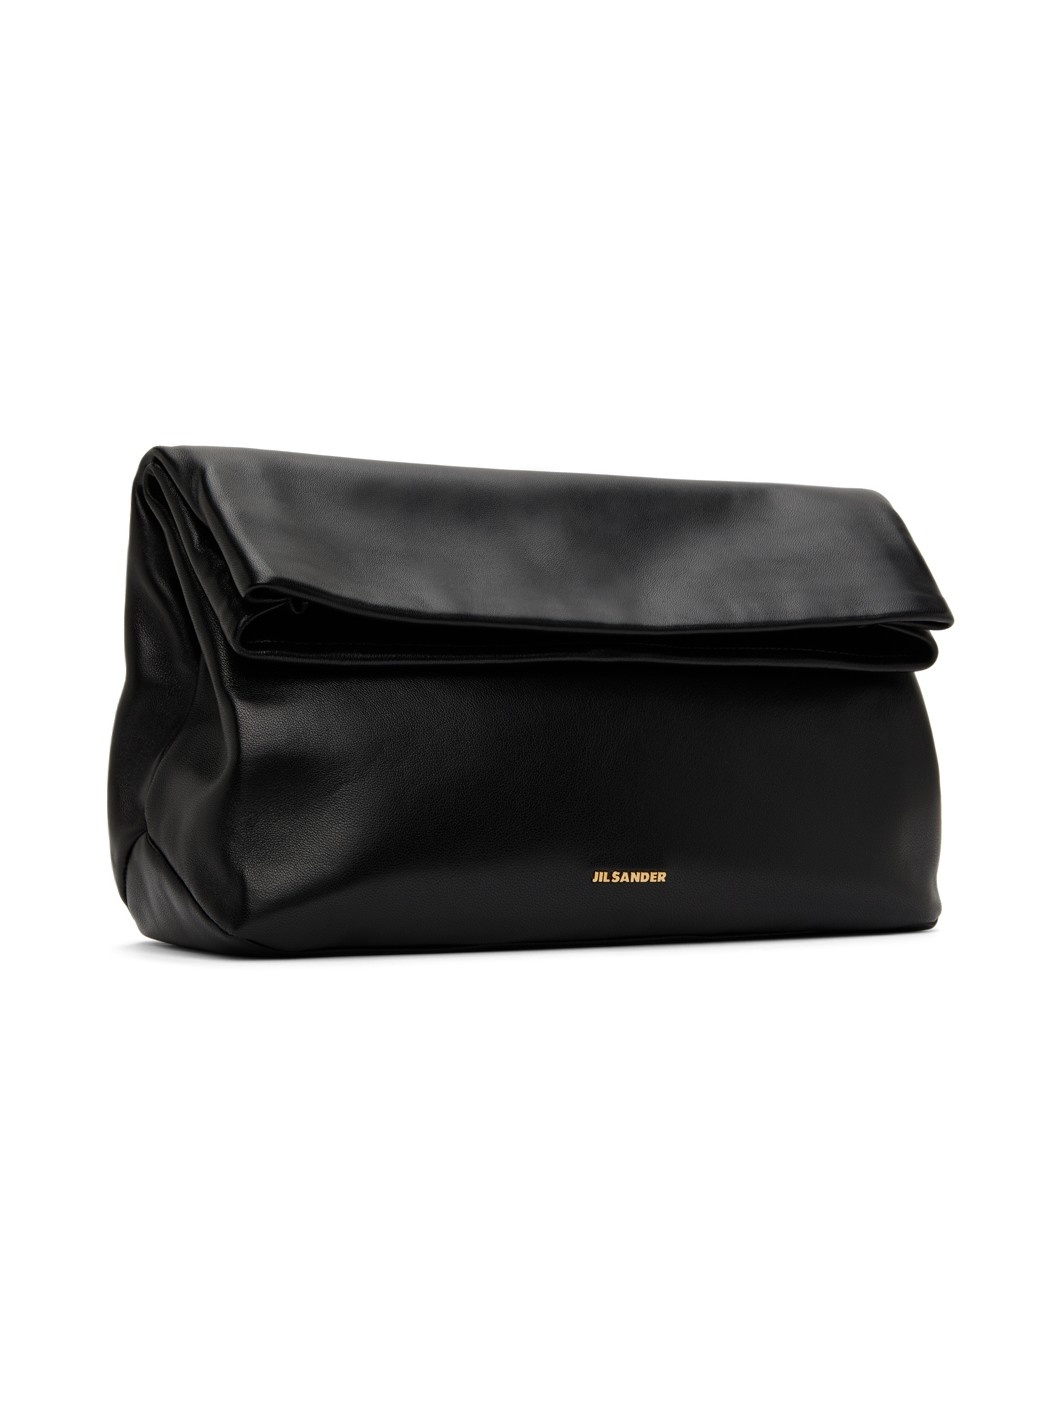 Black Lunch Bag Pouch - 2